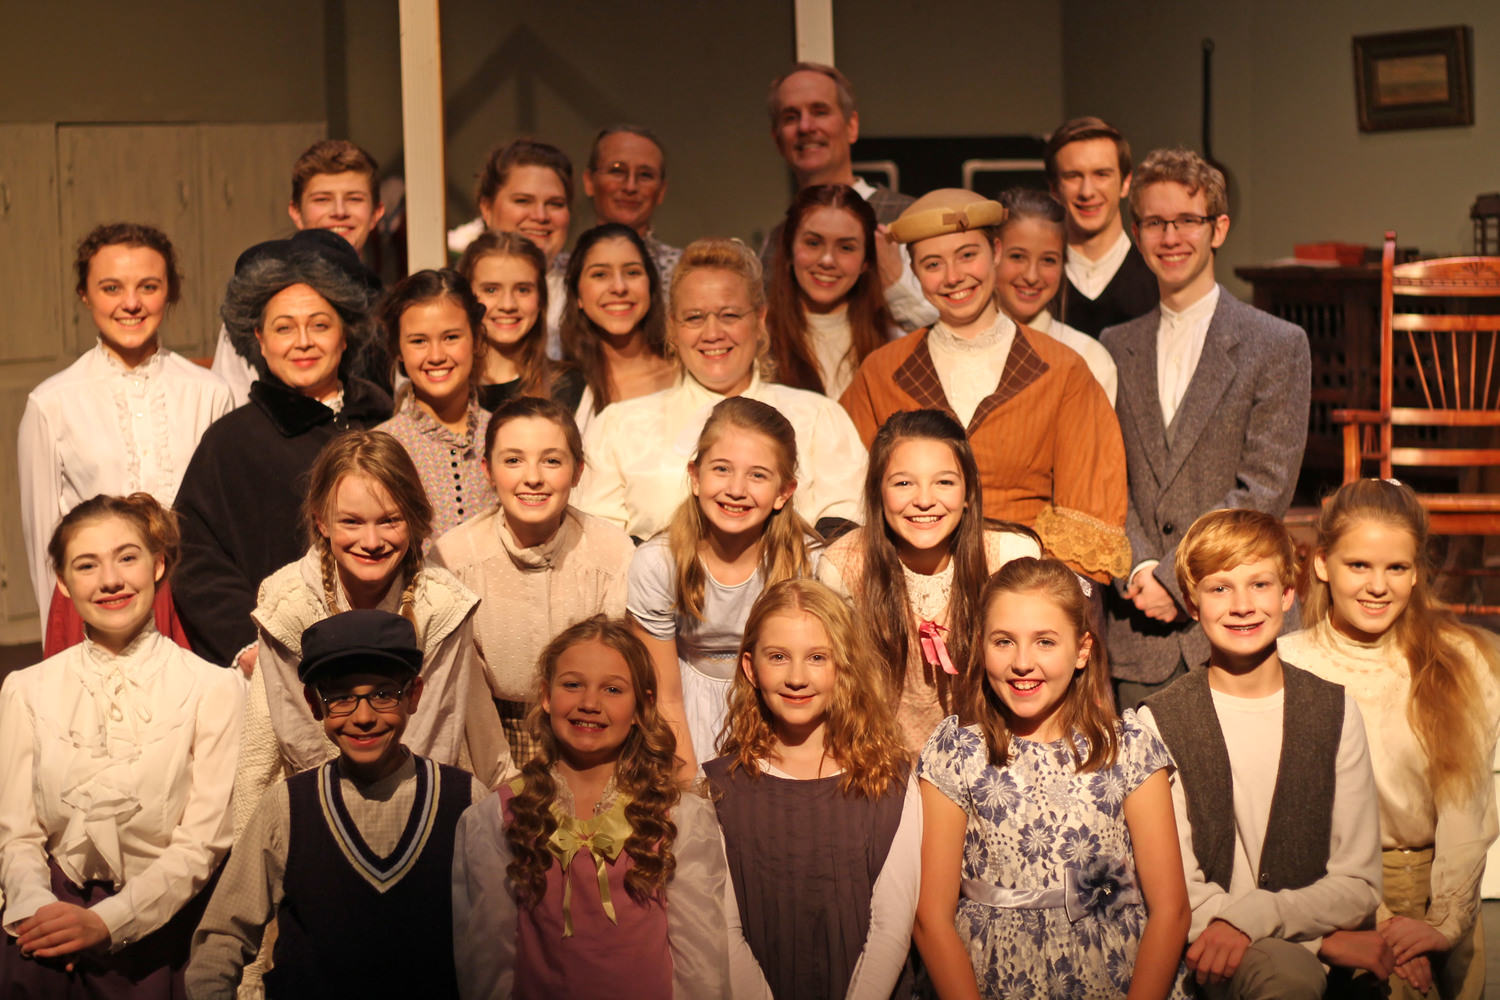 Cast of ANNE OF GREEN GABLES at OCTA. Photo by Shelly Stewart Banks.